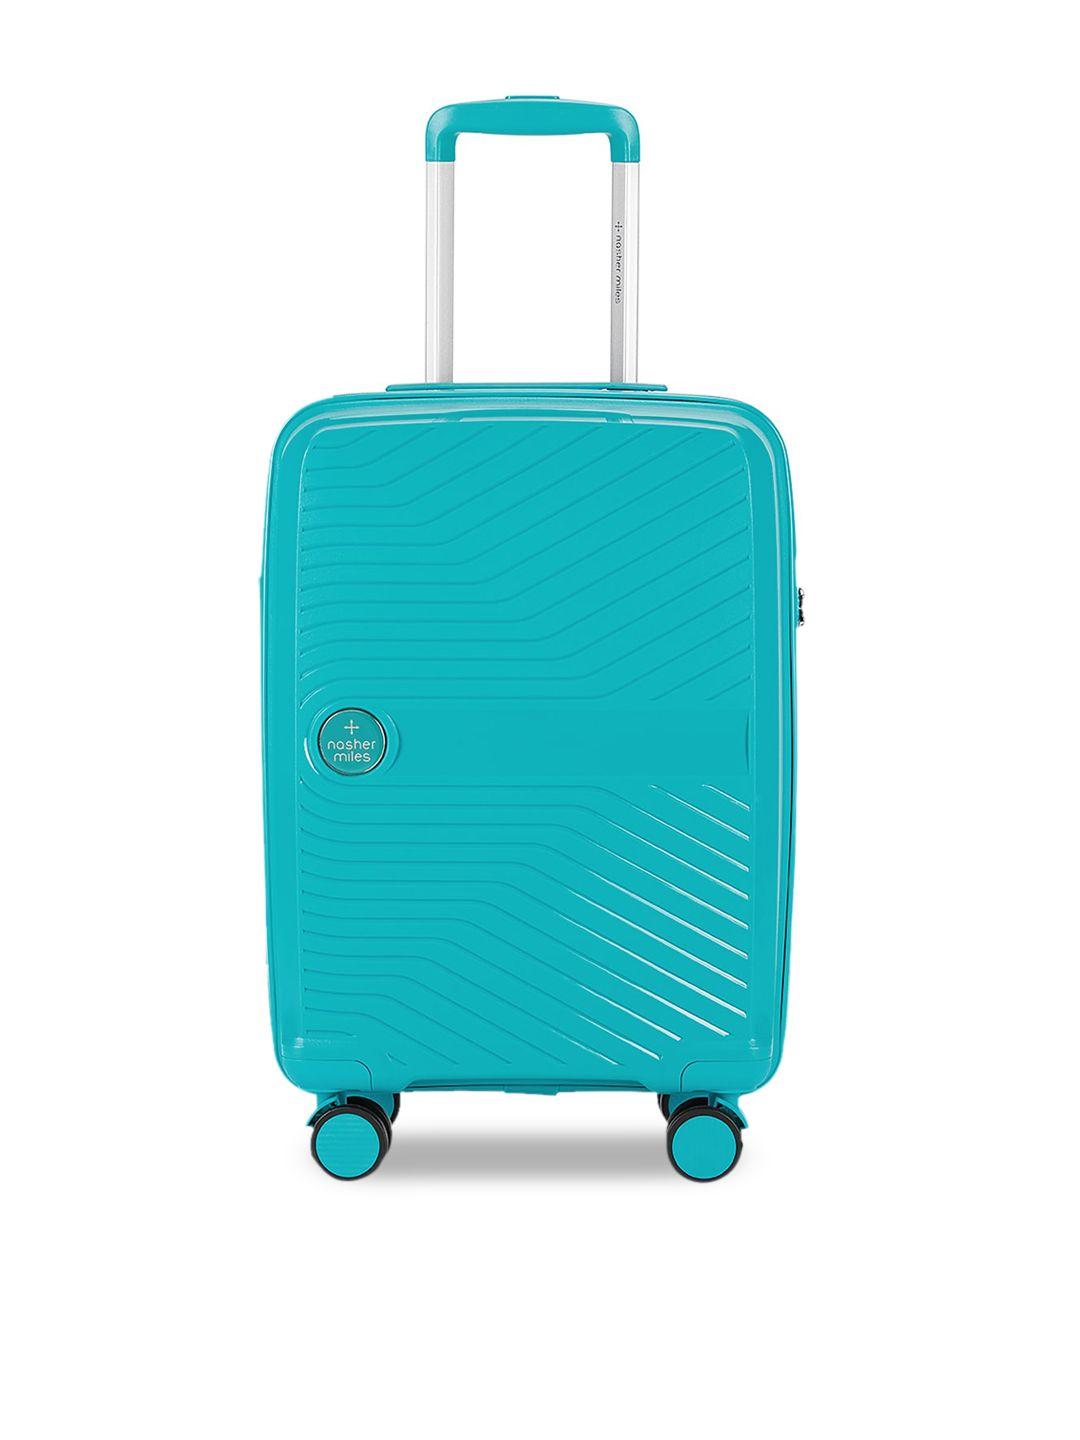 nasher miles teal blue textured hard-sided cabin trolley suitcase